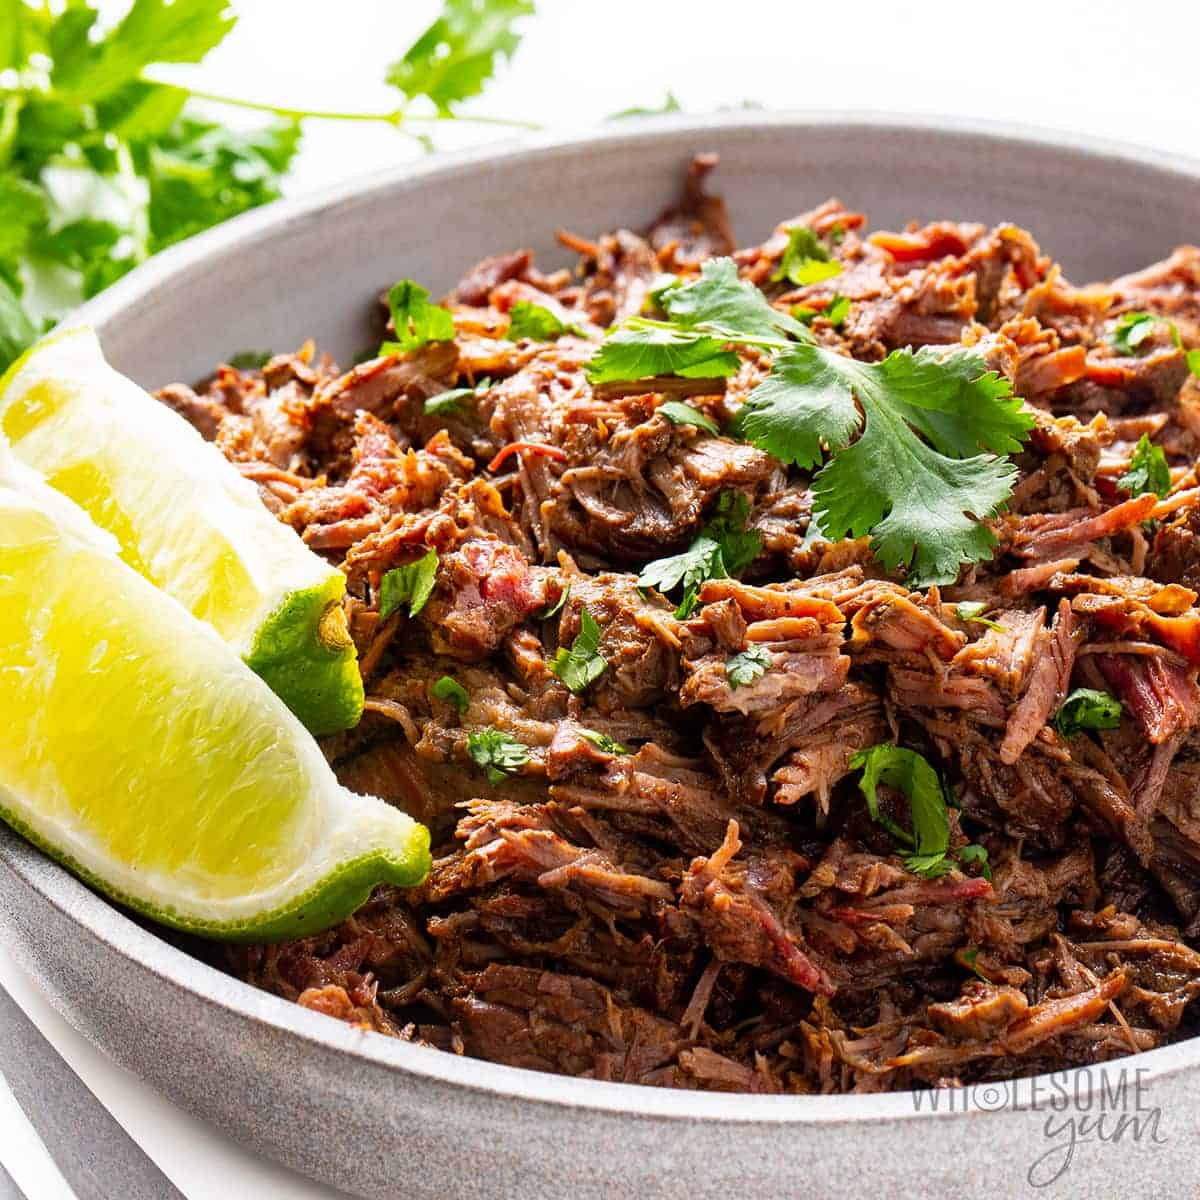 Chipotle beef barbacoa with lime wedges.